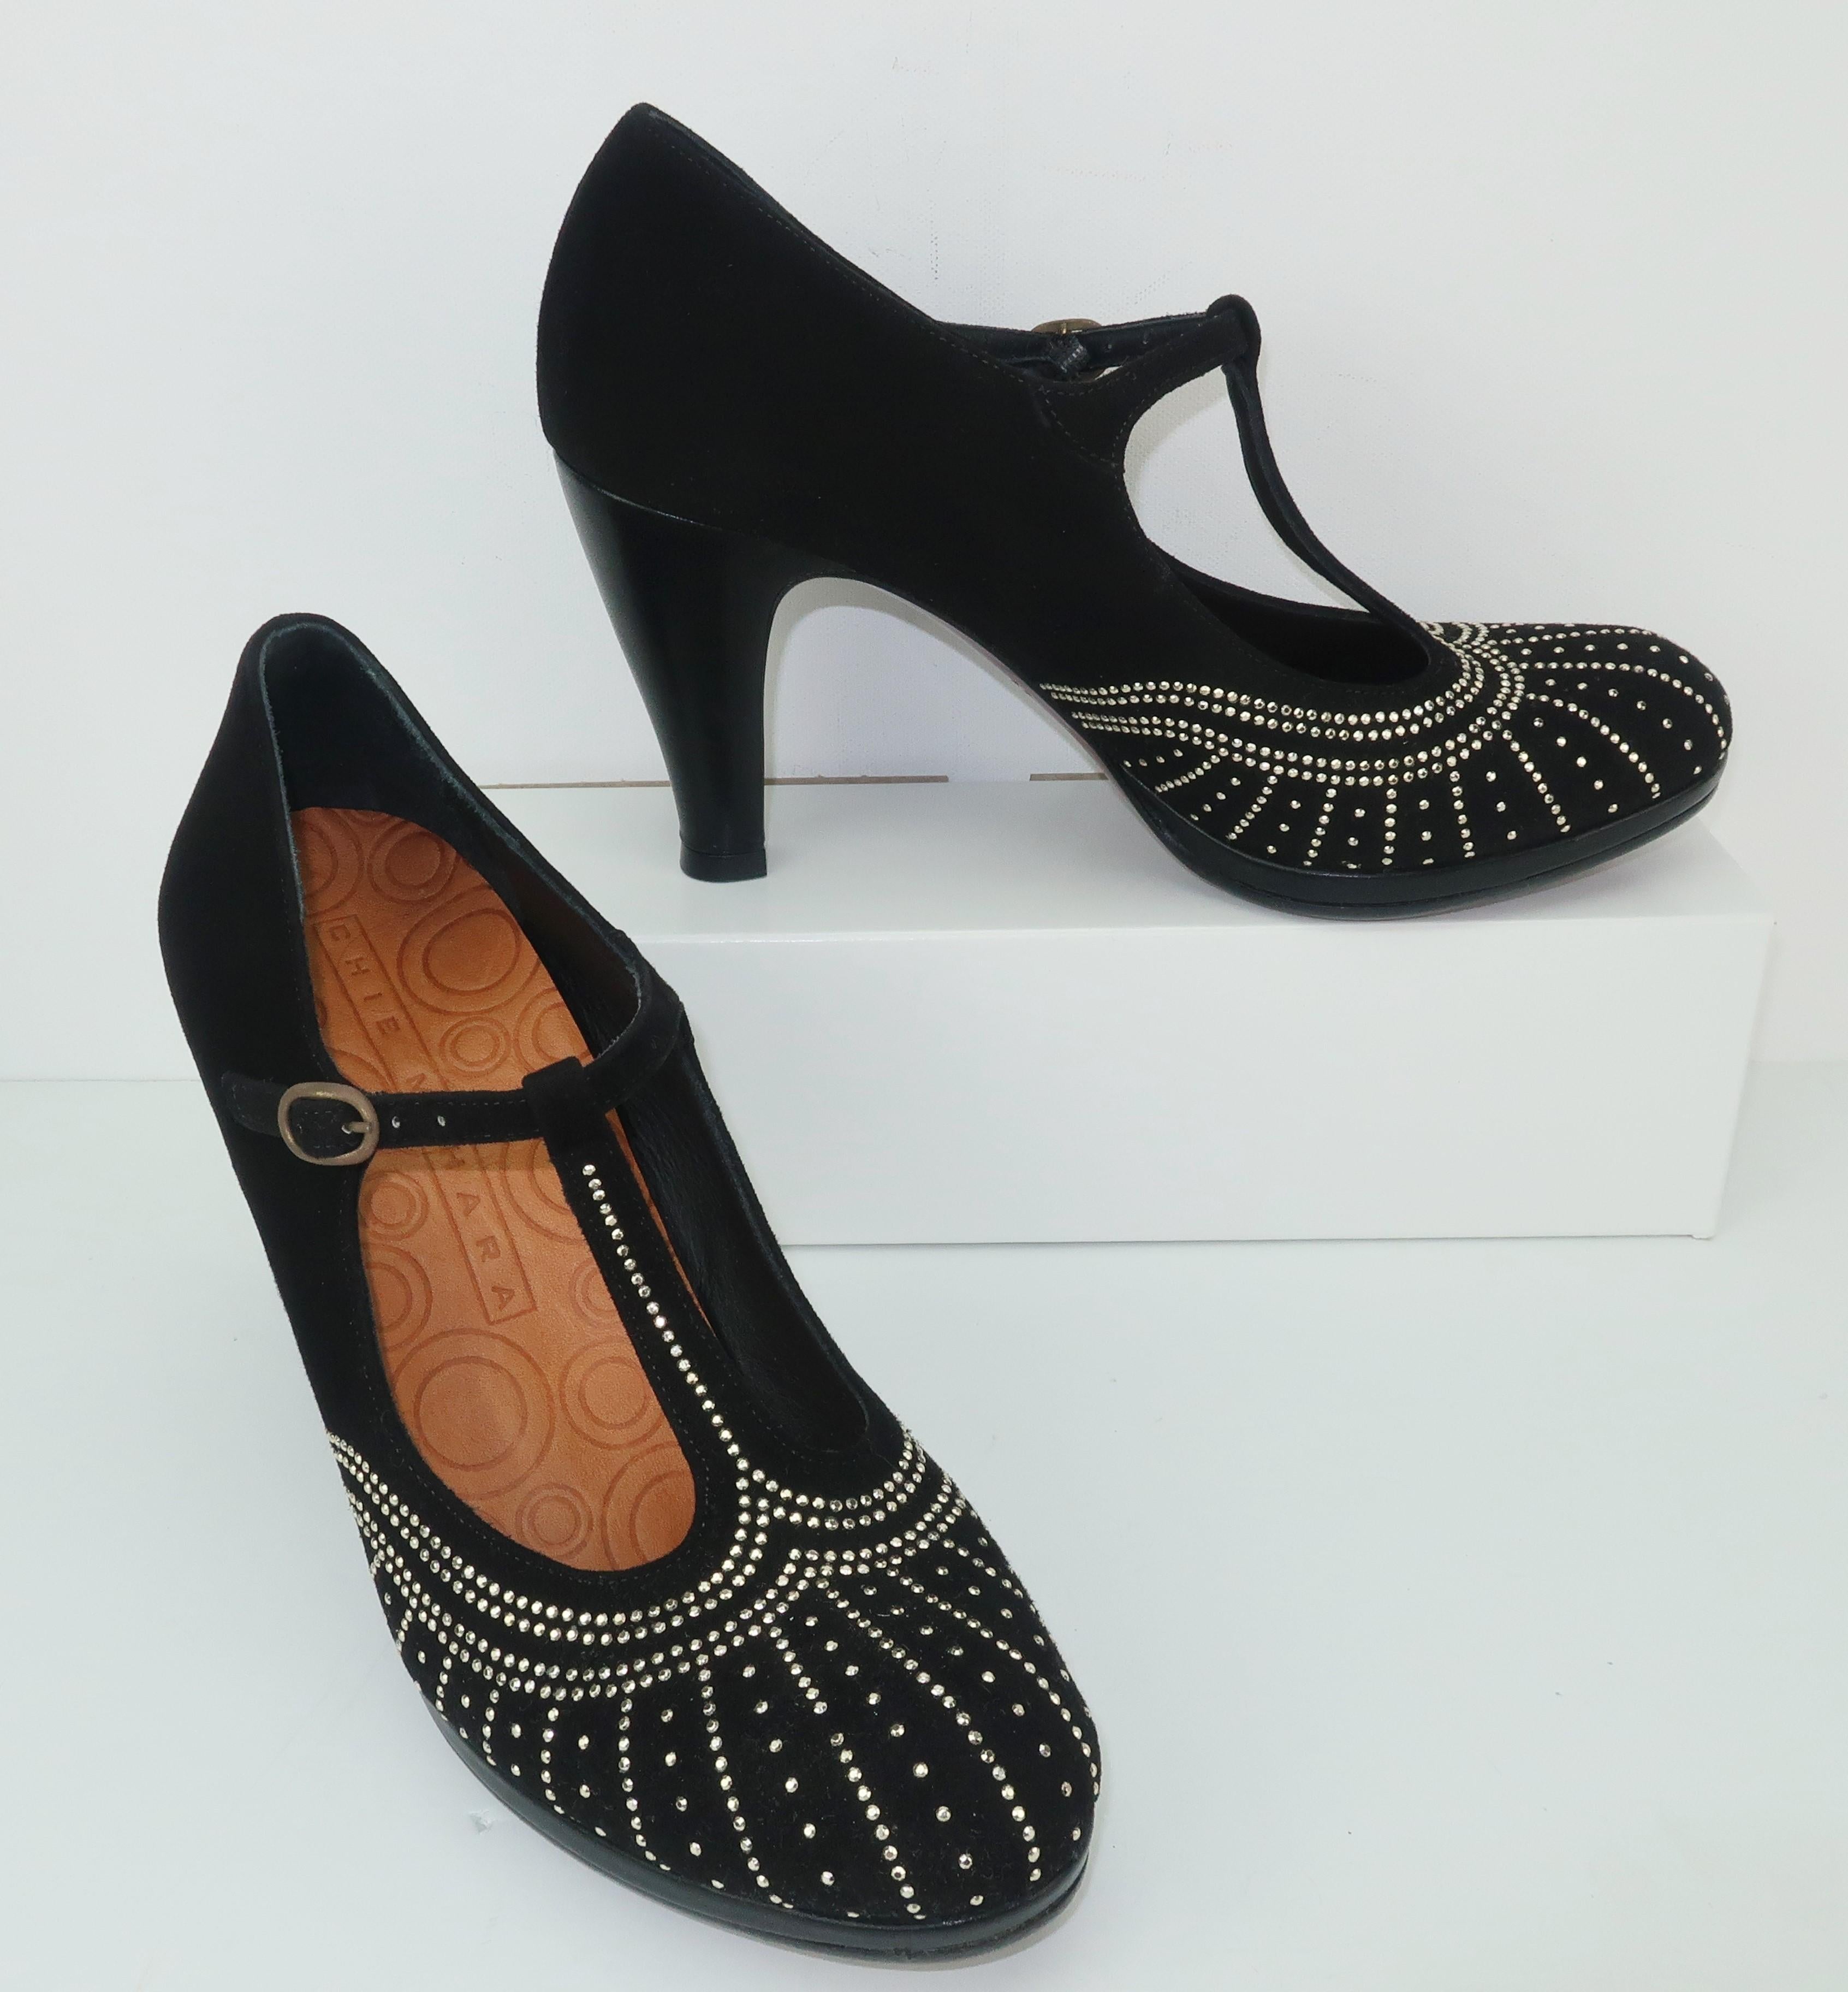 These contemporary shoes by Chie Mihara are a great homage to the Art Deco inspired footwear styles of the 1930's.  The black suede body is a t-strap silhouette with a modest leather platform and 3.75